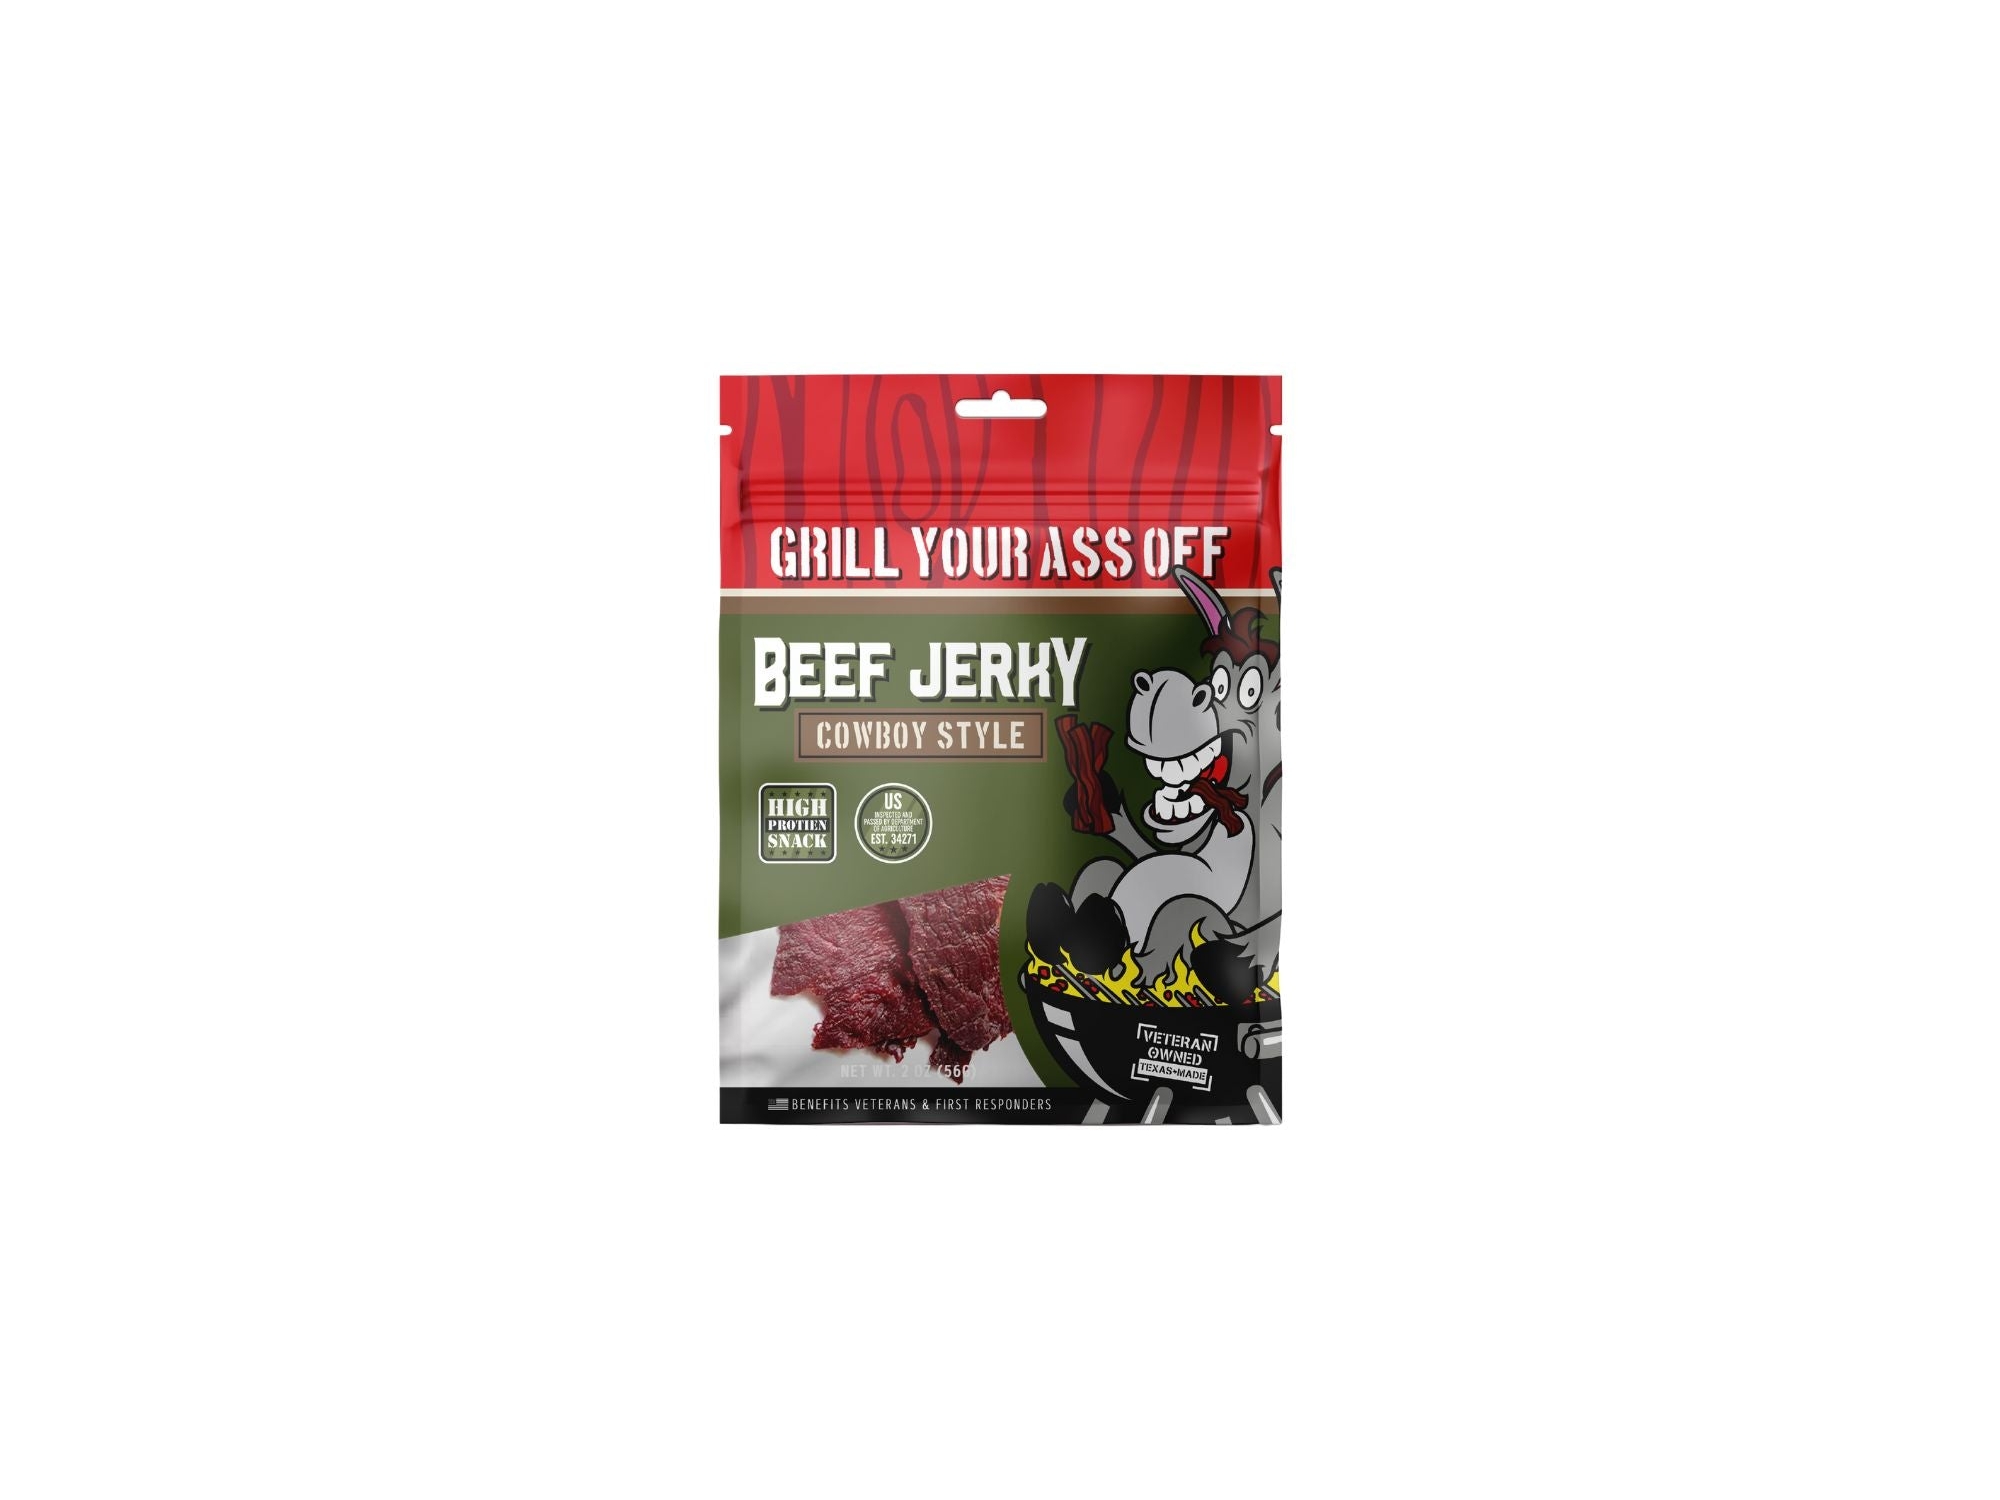 Grill Your Ass Off Cowboy Style Beef Jerky